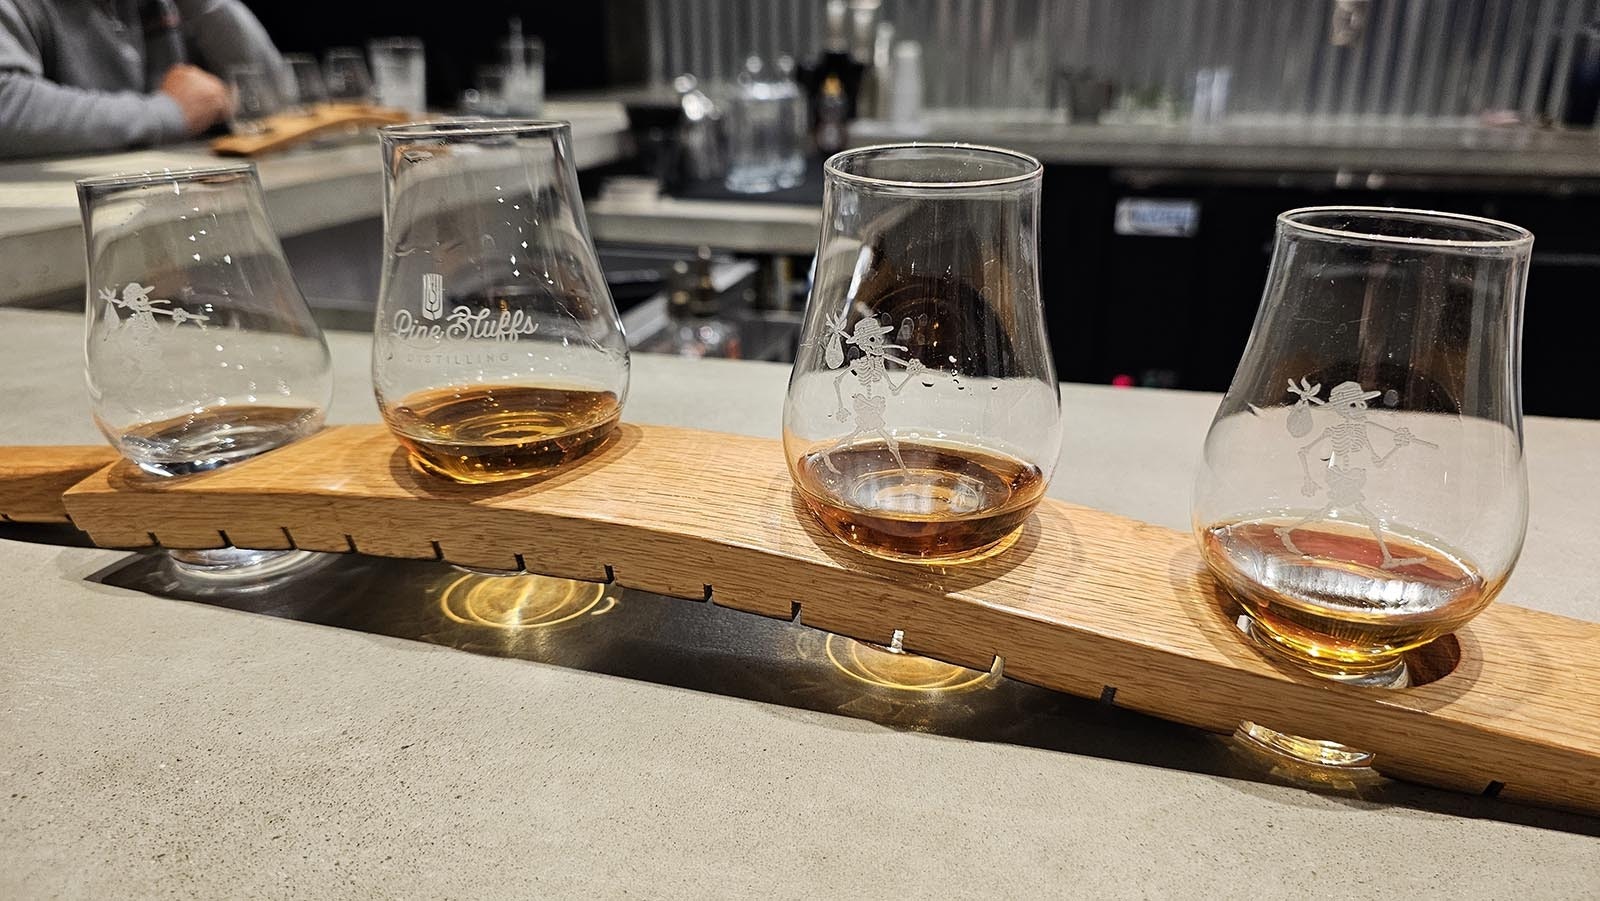 Whiskey flights are also available at Pine Bluffs Distillery. Each of the whiskeys does taste quite different, but with pleasing notes of sweet heat and spice.